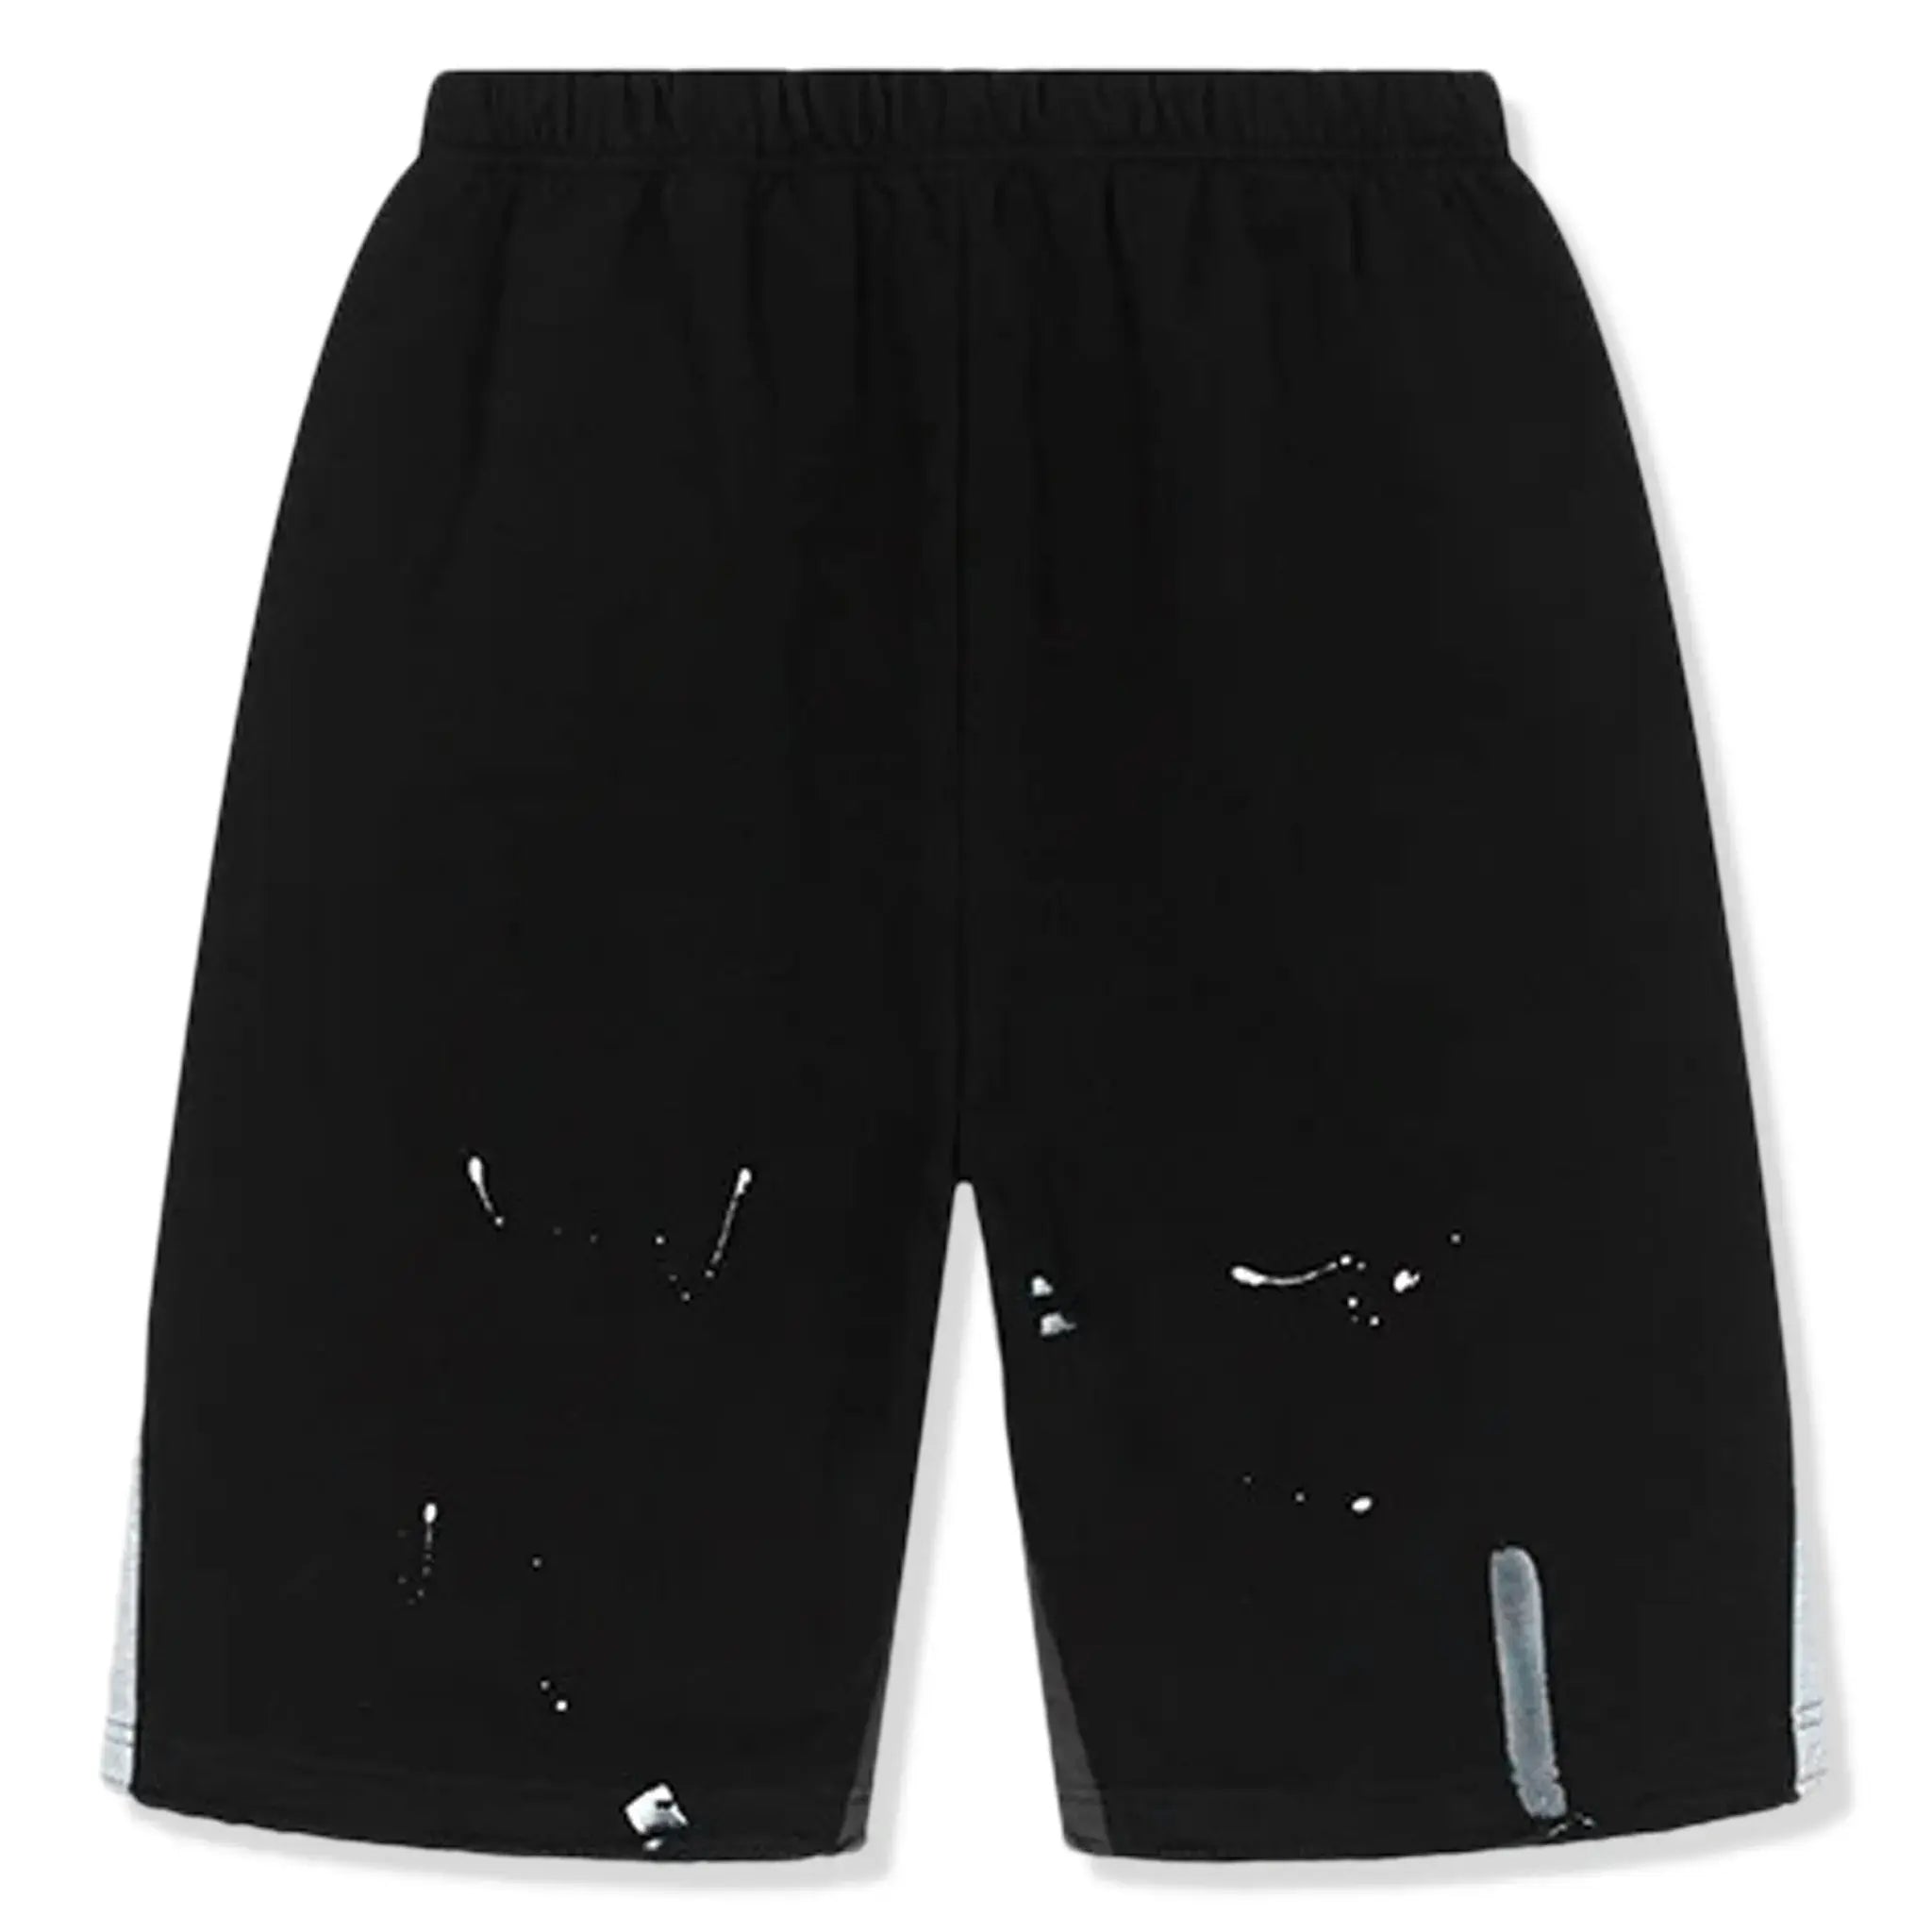 Back view of SIARR Paint Shorts Black